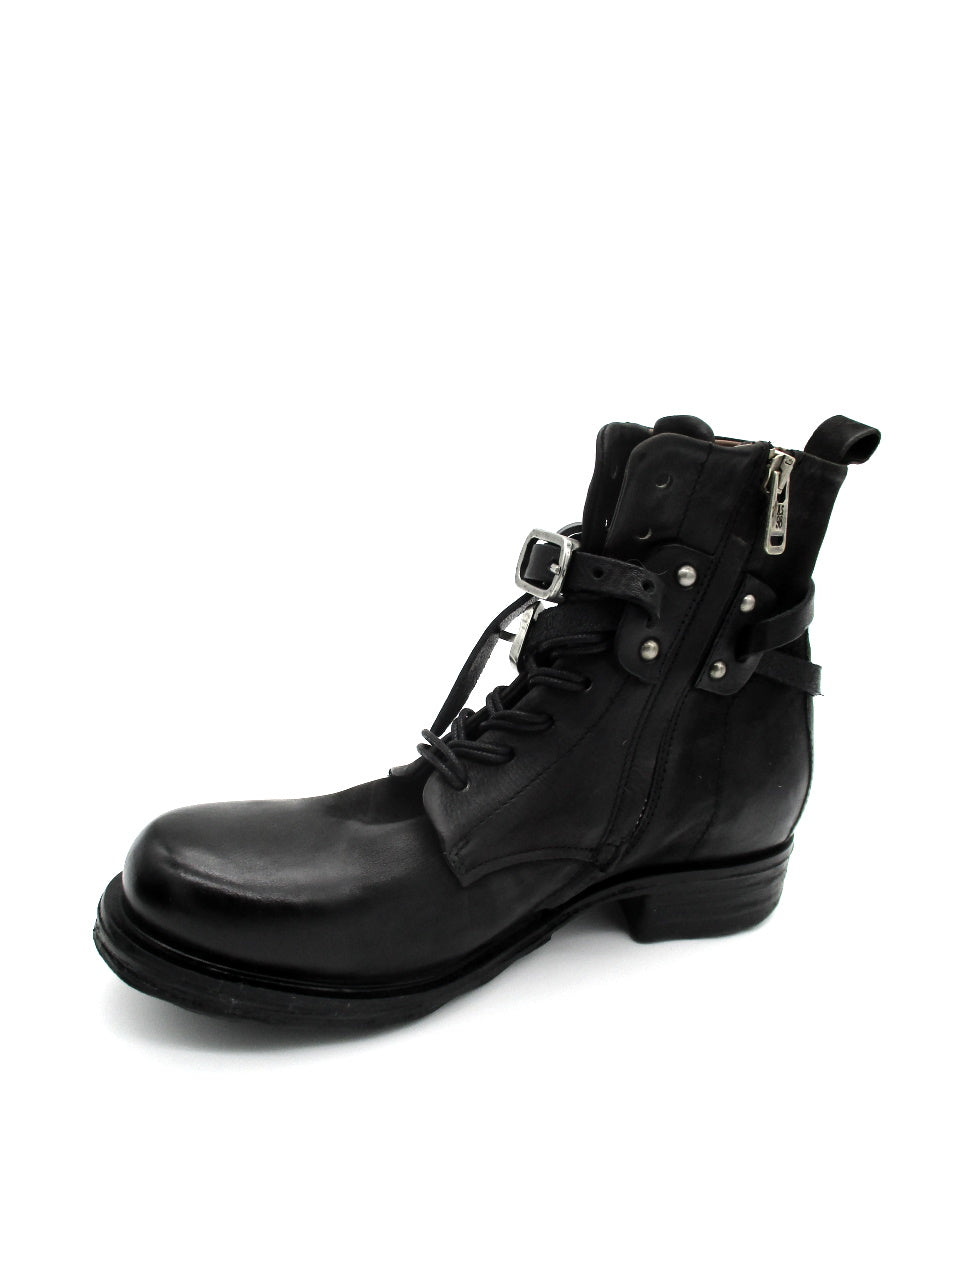 Women's leather ankle boot AS98 A50211 Black